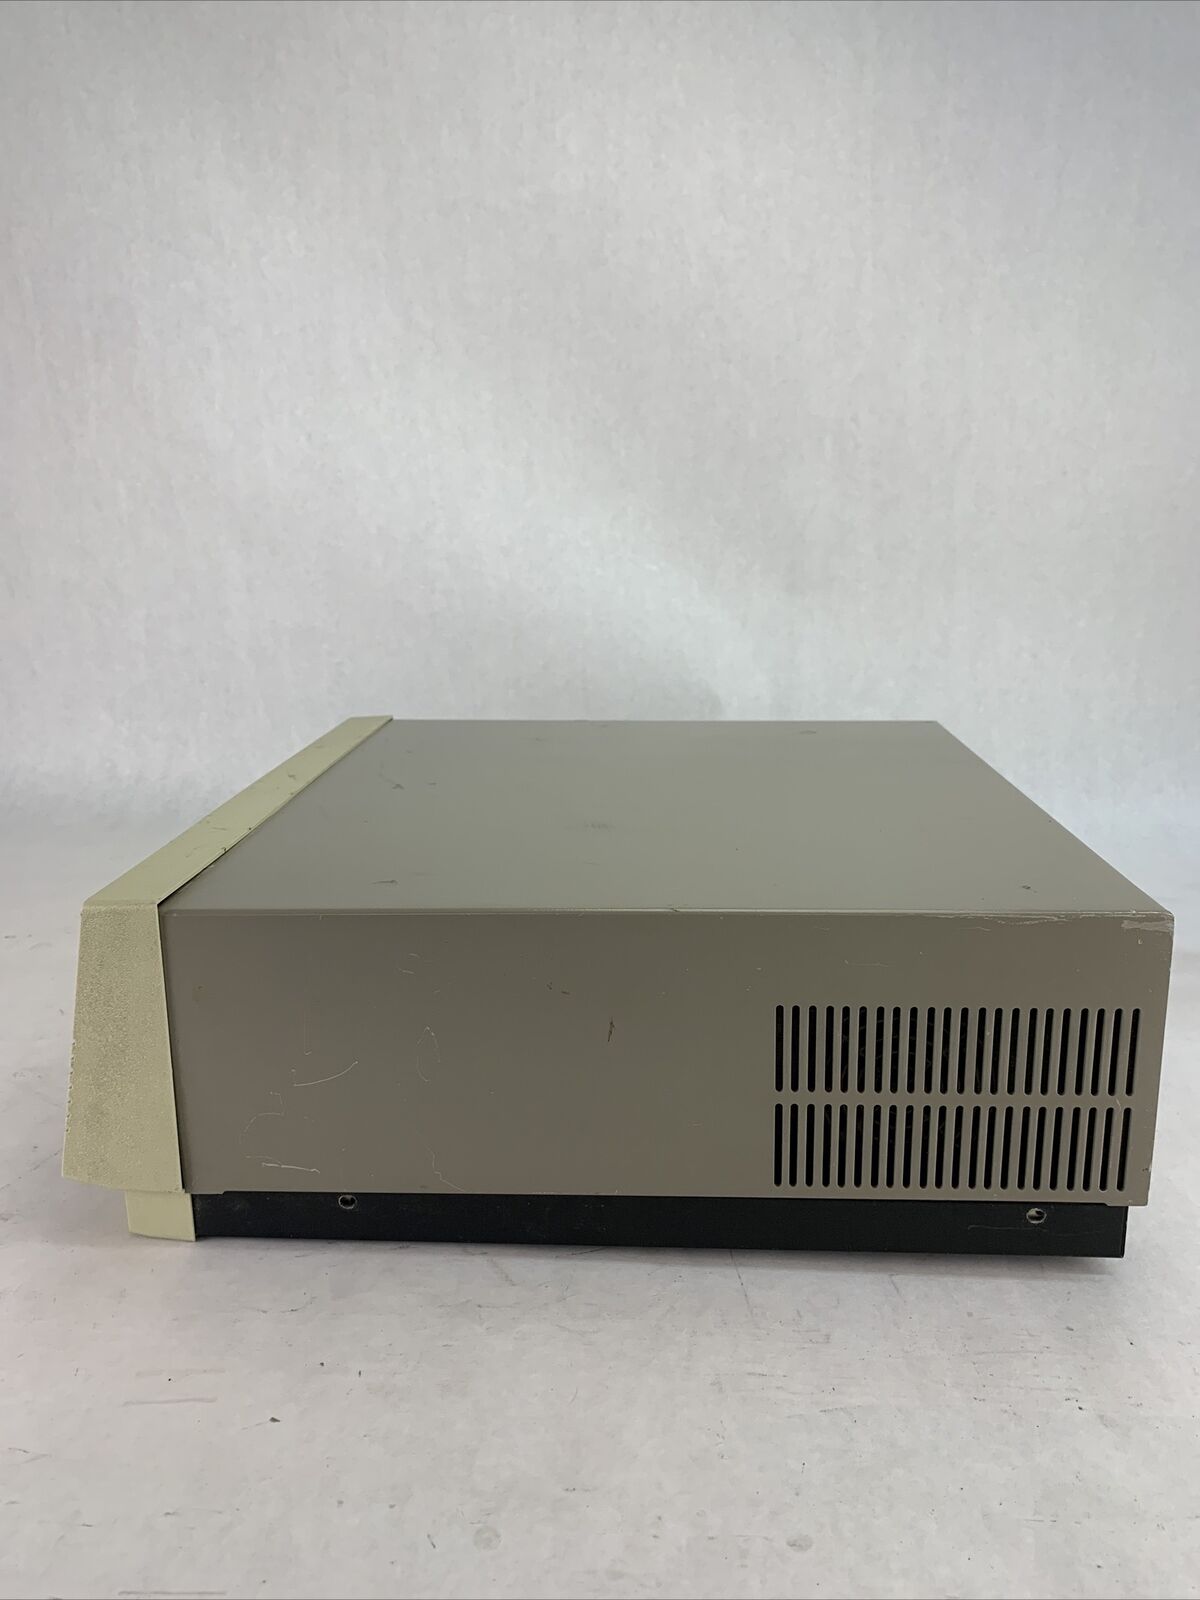 Zenith ZF-1217-DY P8088-2 815MHz 640MB RAM No HDD No OS